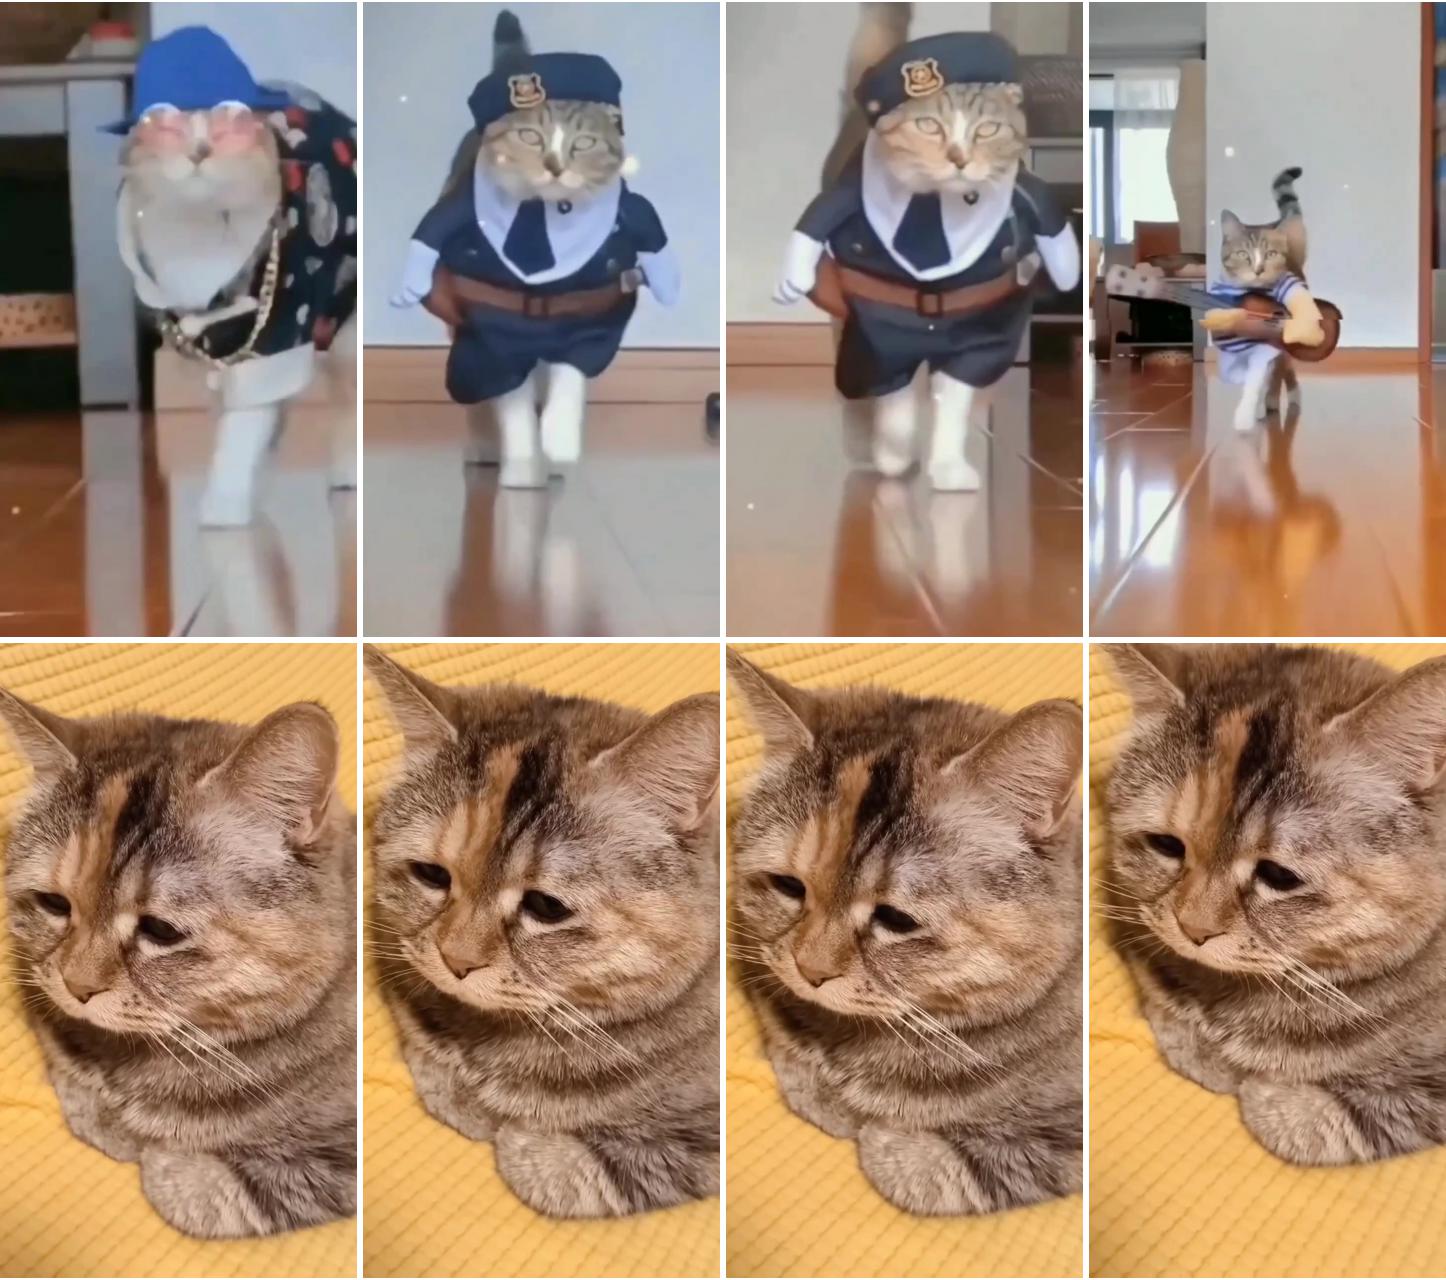 Cats cute cat funky cat stylish cat in clothes; #catoftiktok #kitty #fyp #catlover